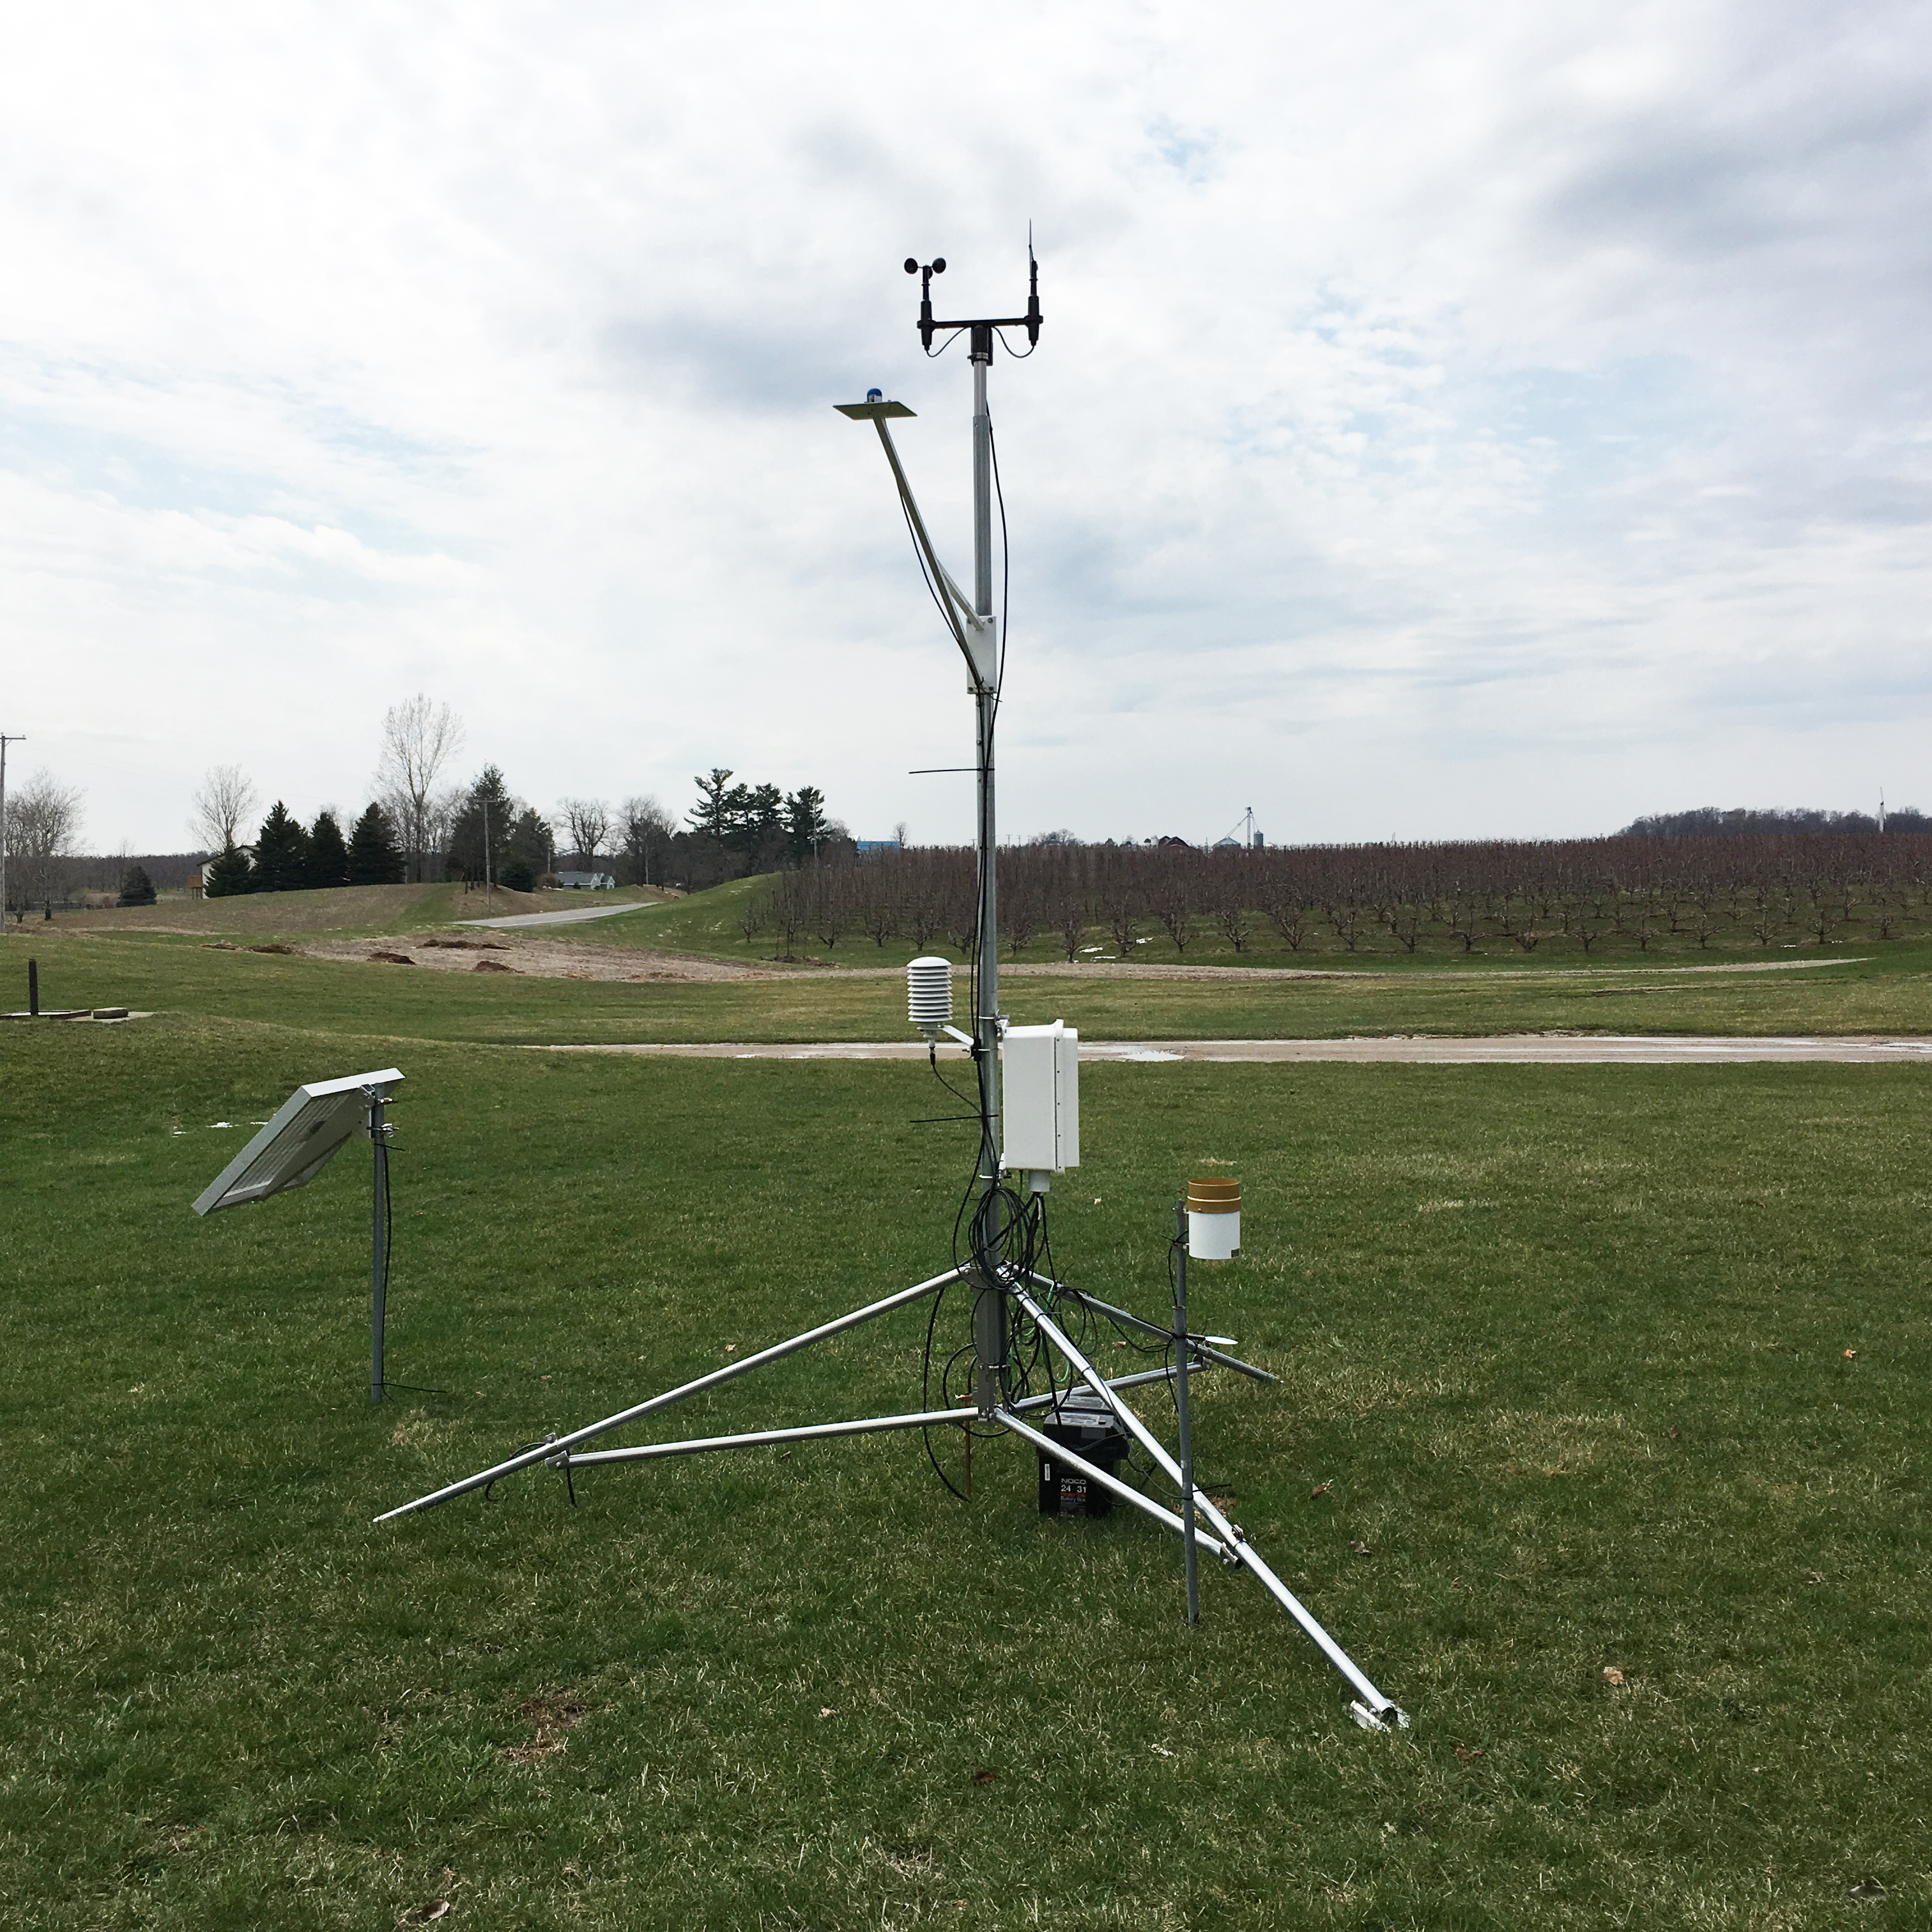 Enviroweather stations include a solar-powered tower that collects information on temperature, rainfall, relative humidity, dew point, soil temperature, wind direction and more.